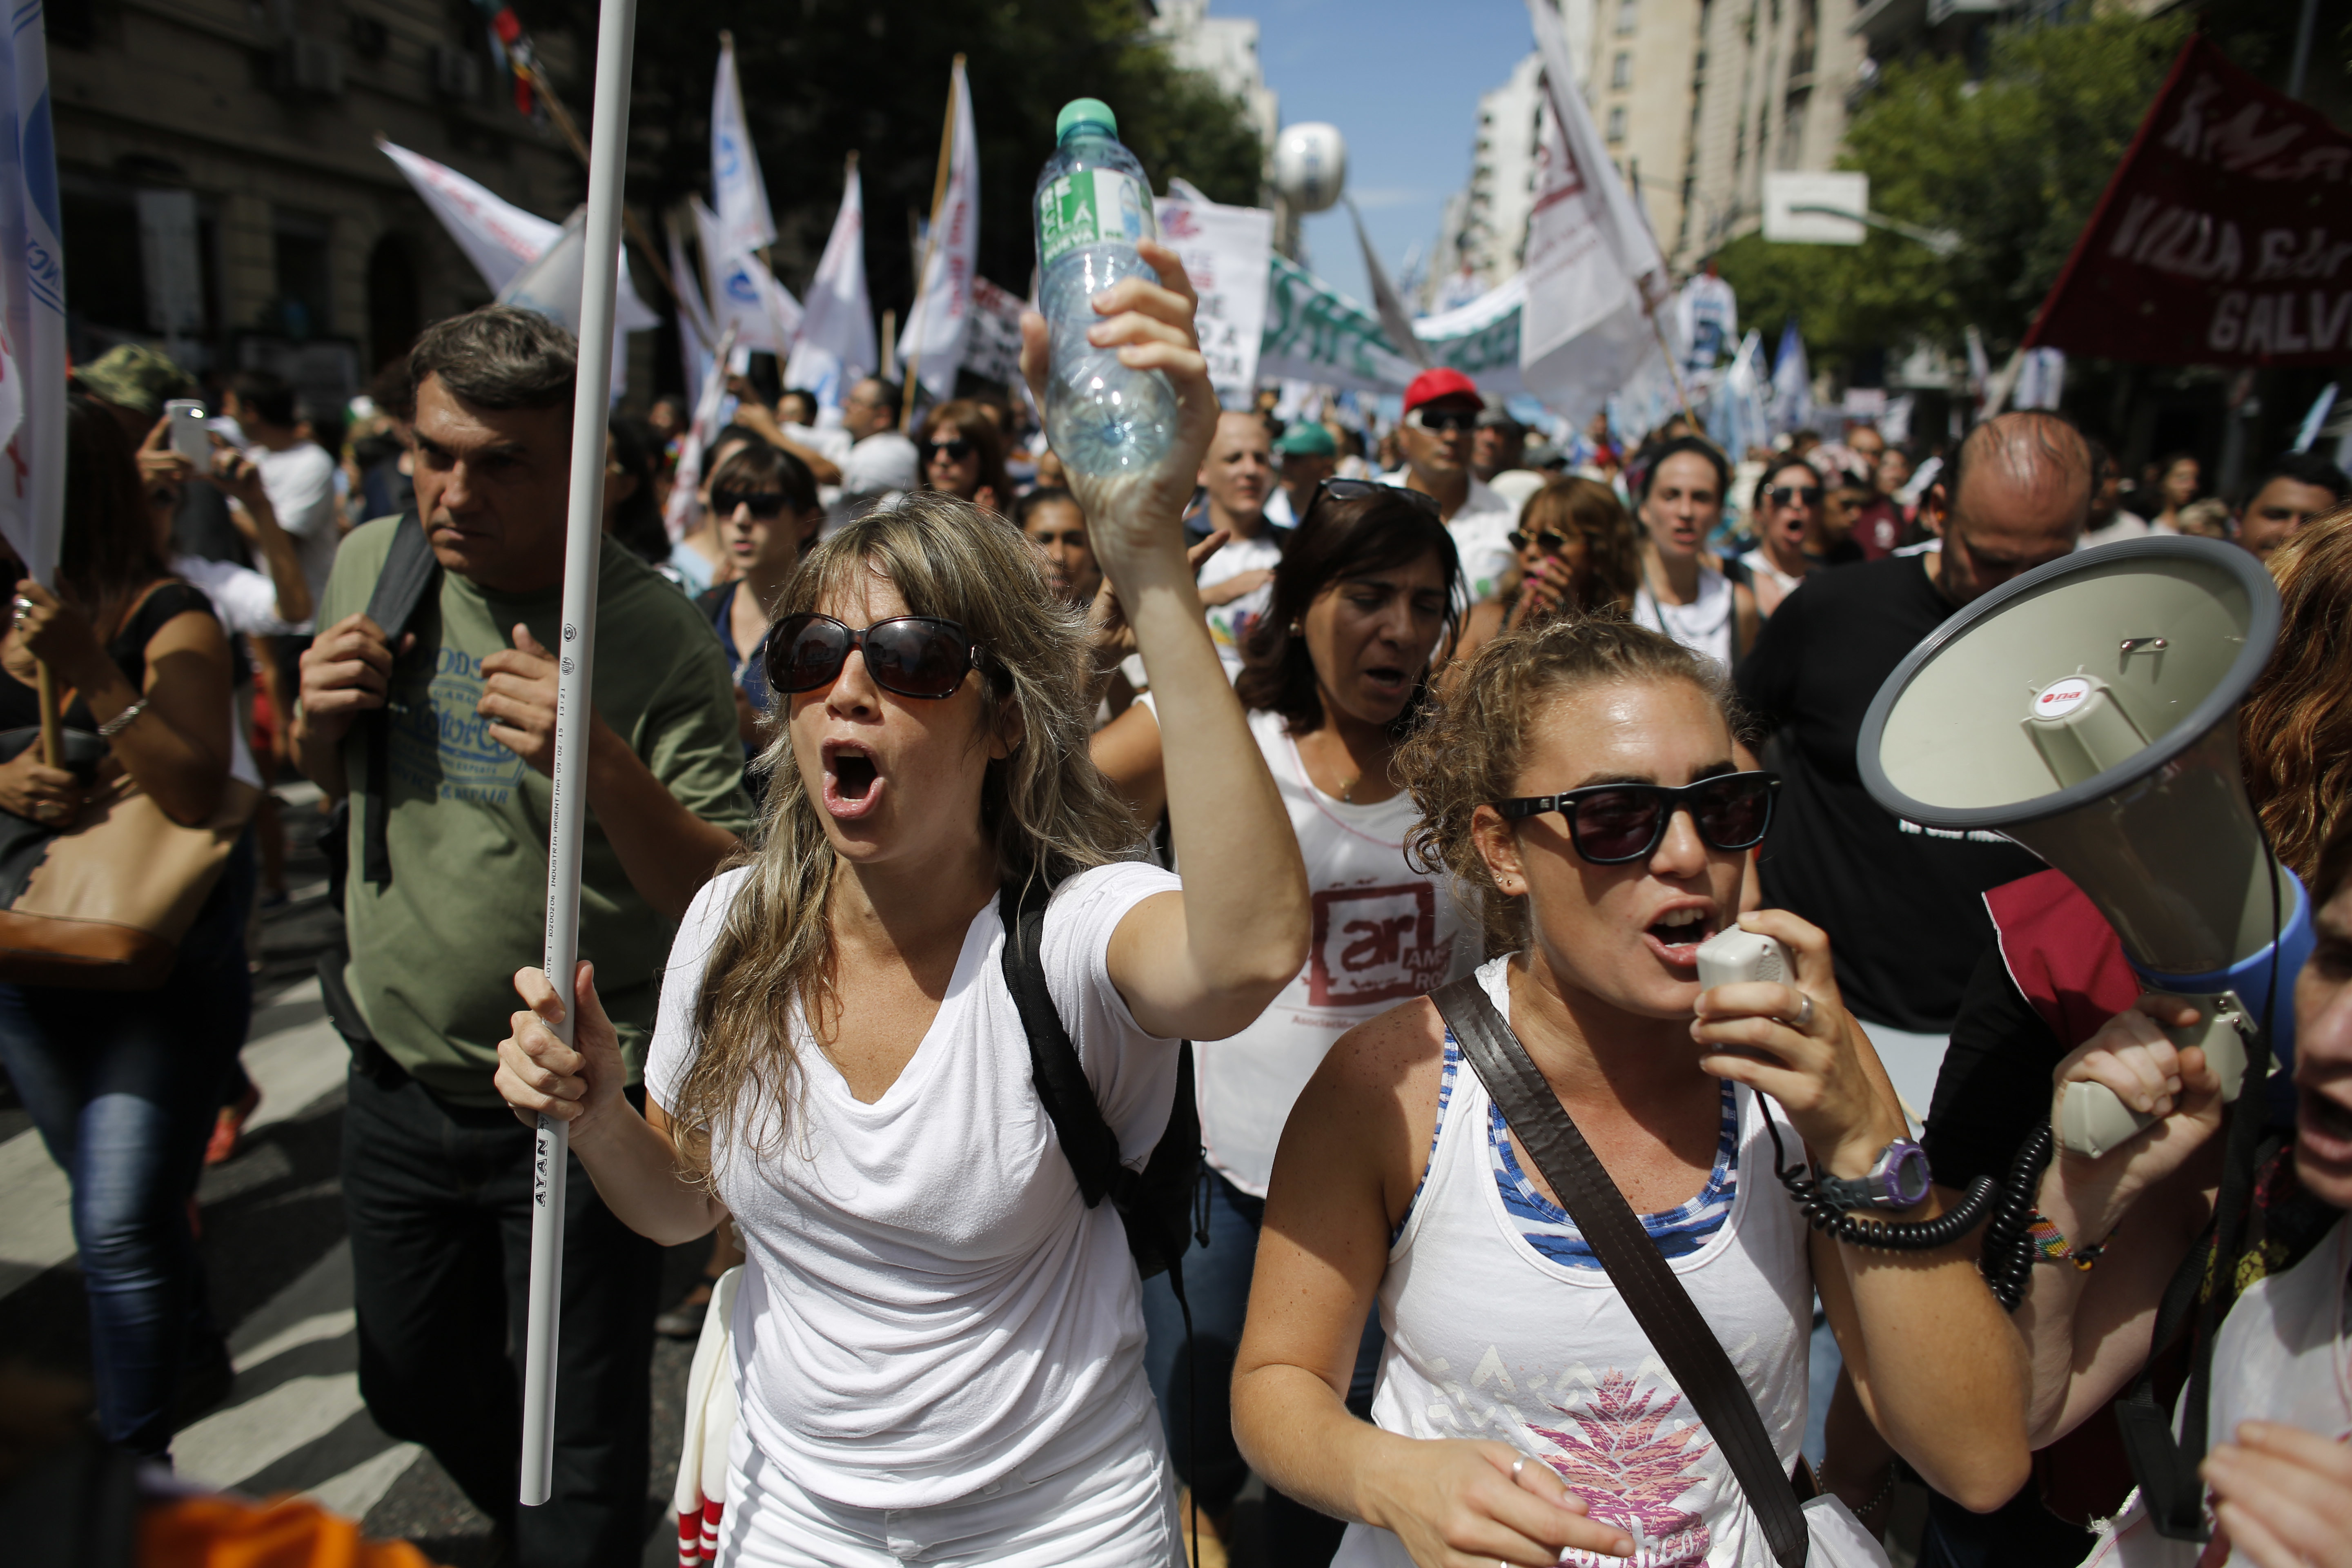 Teachers shout slogans during a protest in Buenos Aires, Argentina, Monday, March 6, 2017. Teachers in a nationwide strike have left millions of children without classes in the first serious union conflict for president's Mauricio Macri's administration. (AP Photo/Victor R. Caivano)